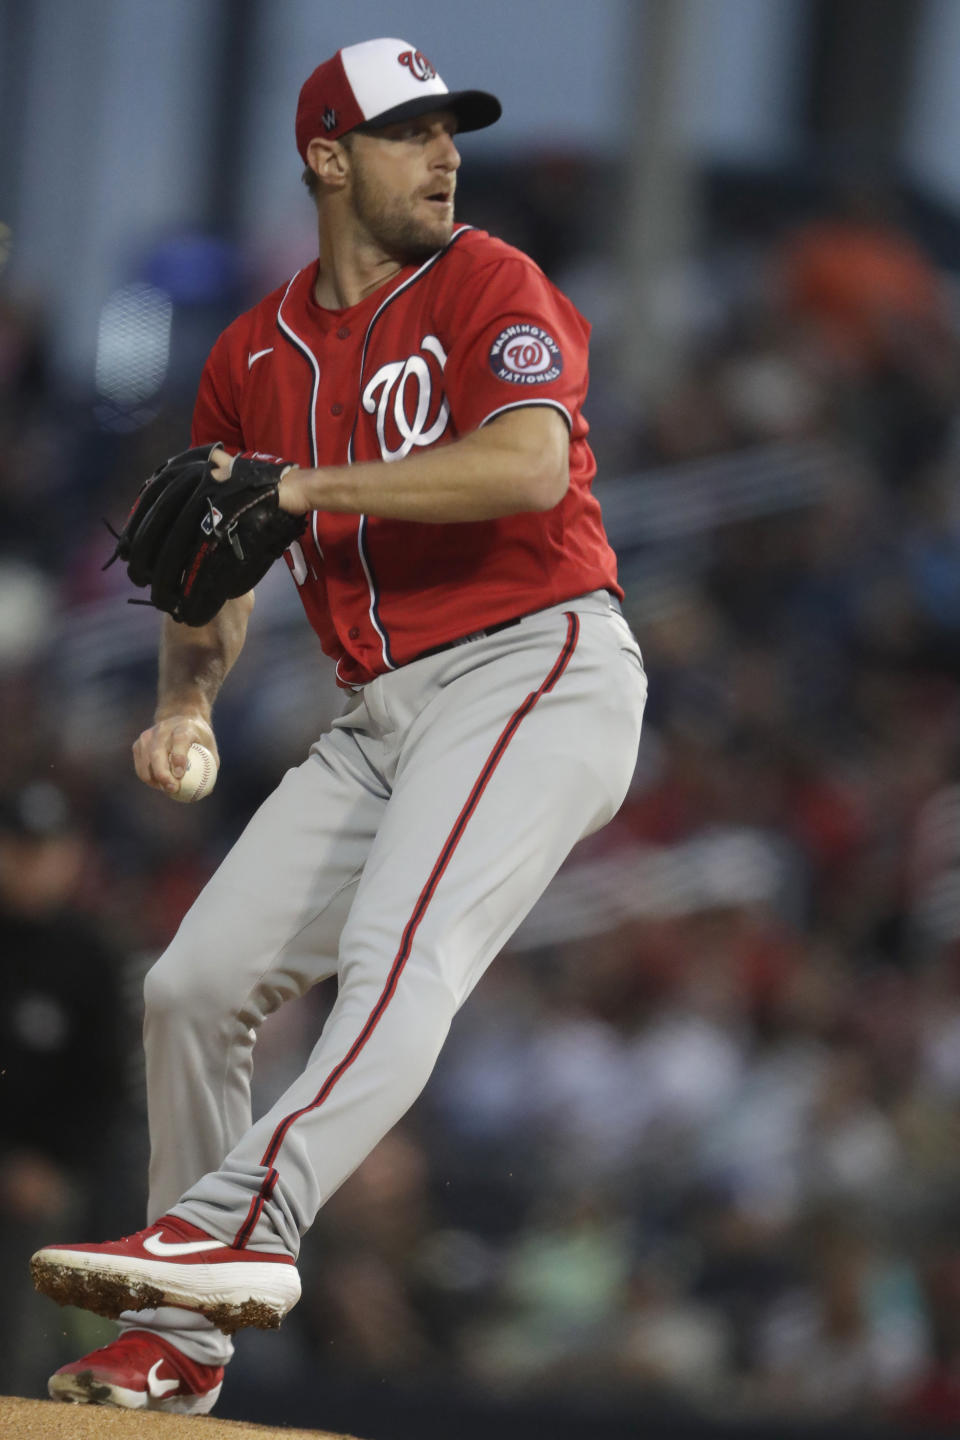 Washington Nationals starting pitcher Max Scherzer (31) works in the first inning of a spring training baseball game against the Houston Astros Saturday, Feb. 22, 2020, in West Palm Beach, Fla. (AP Photo/John Bazemore)